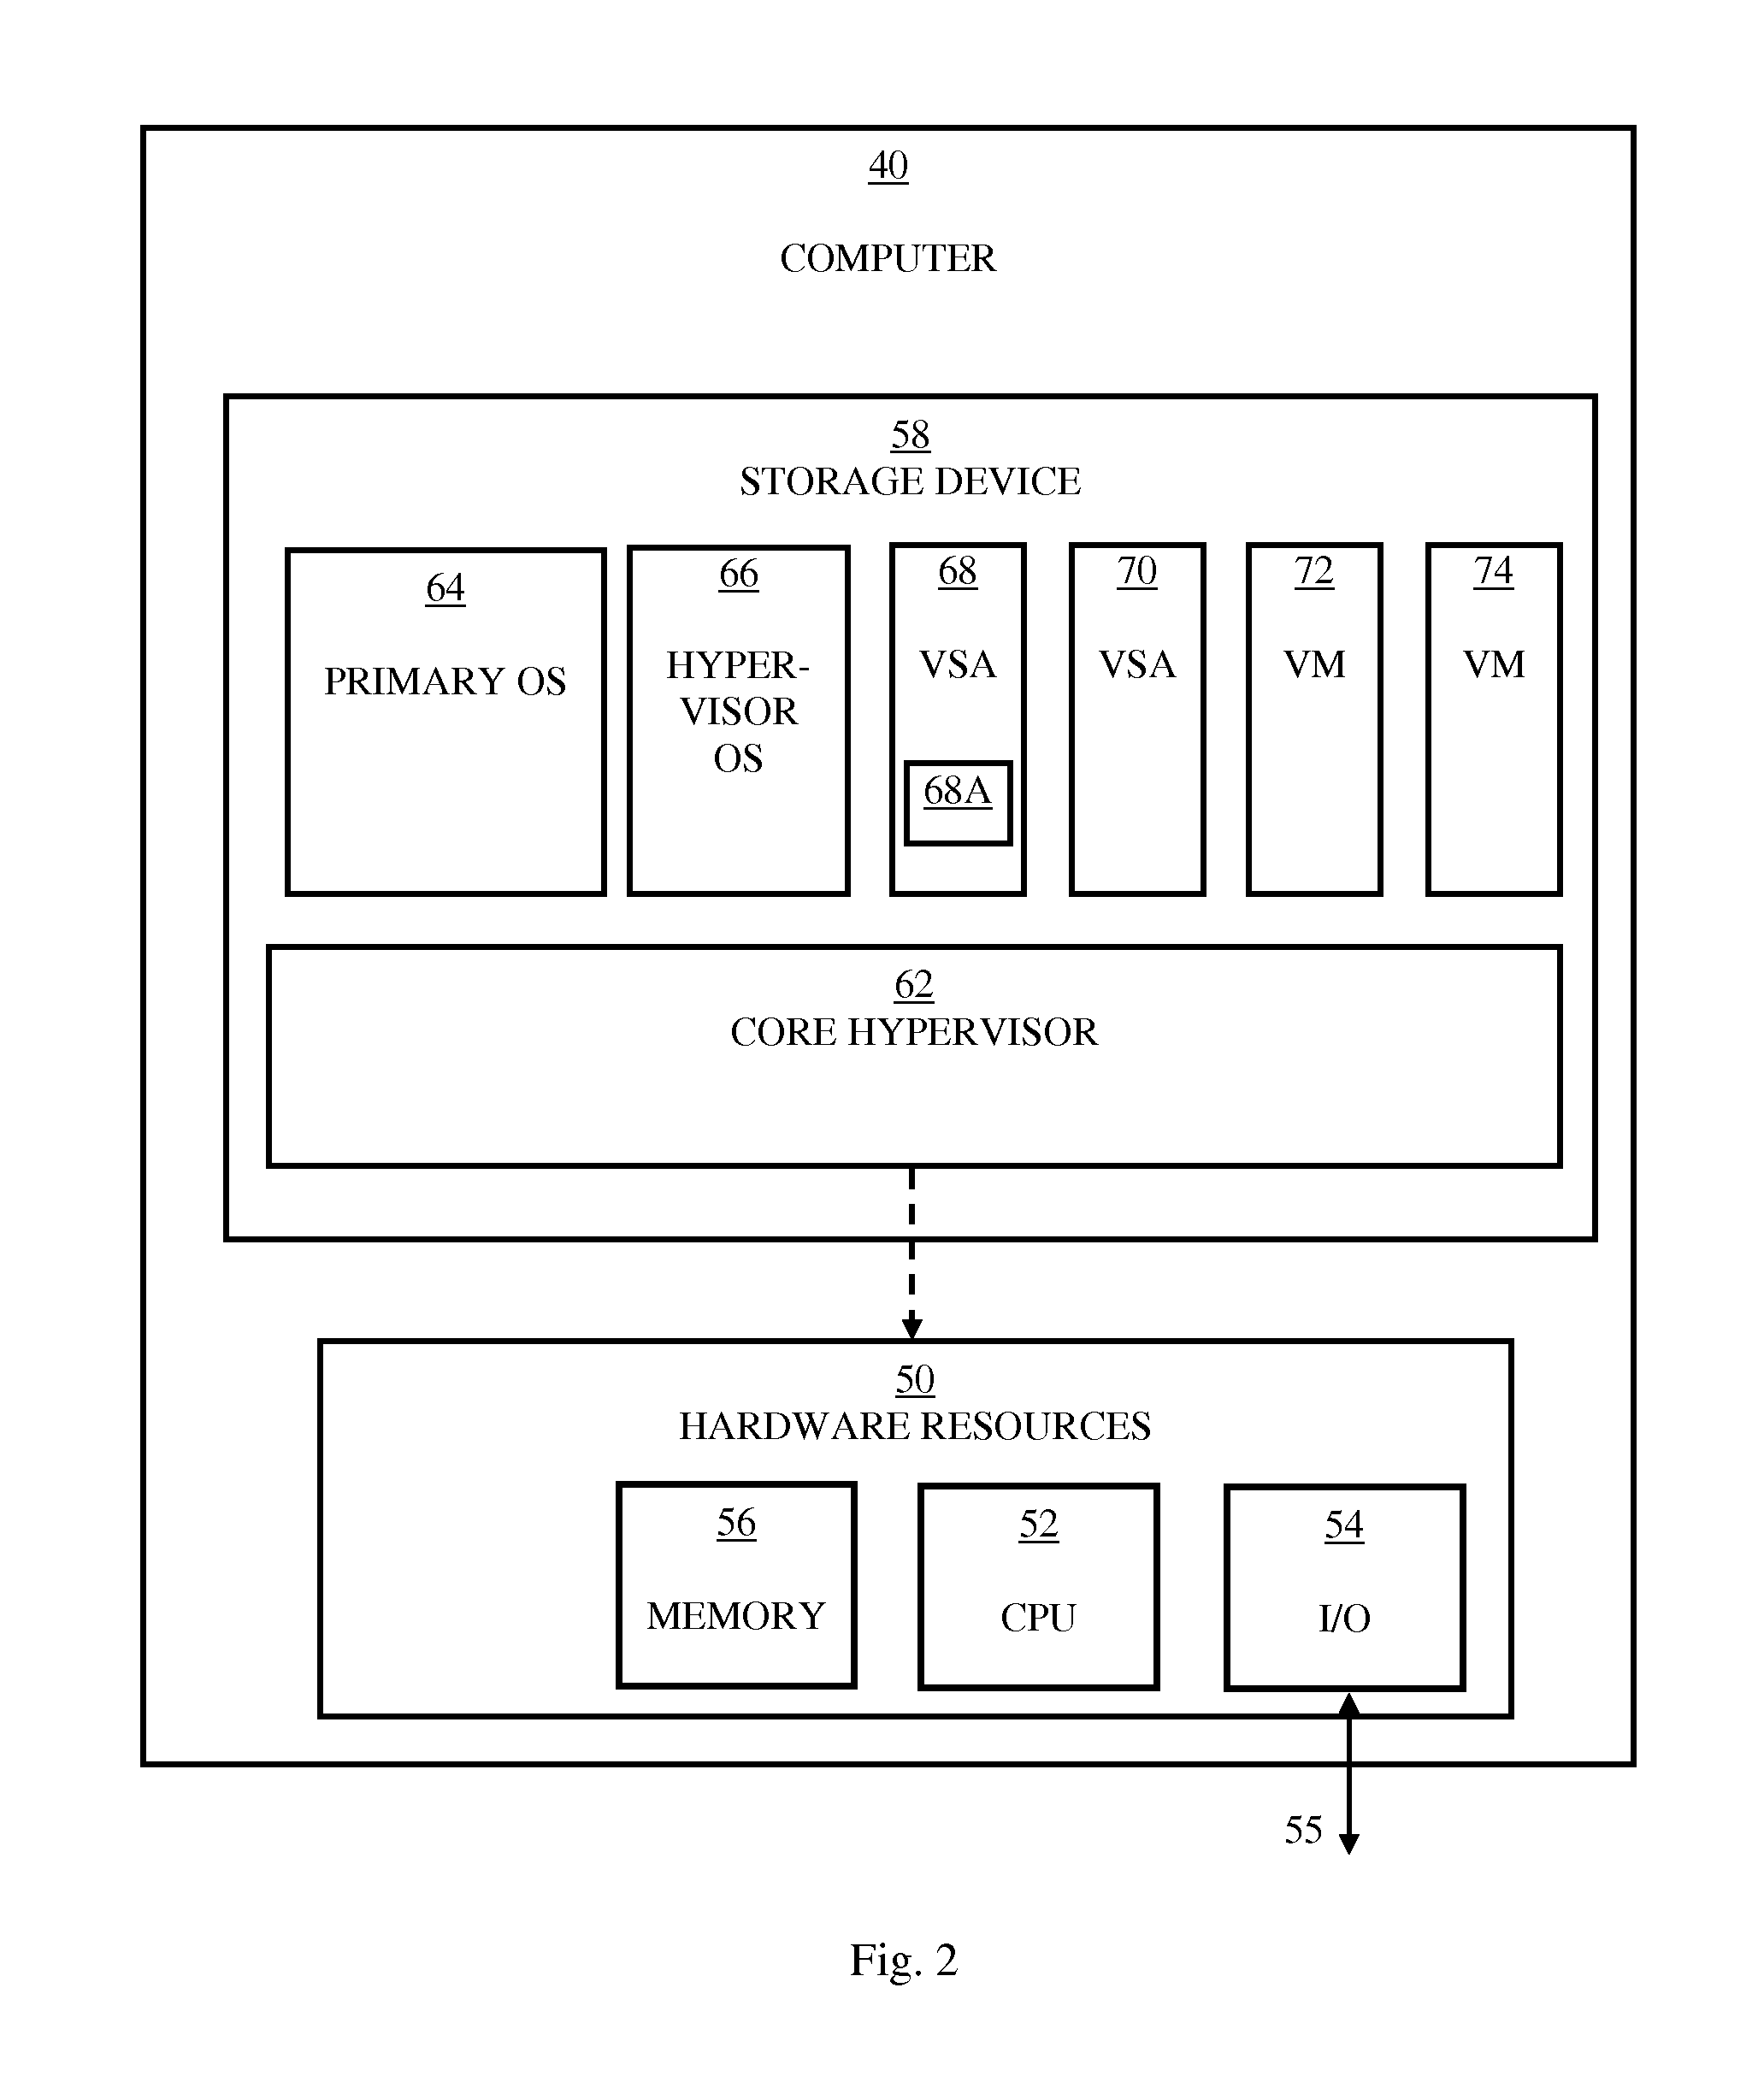 System and method for hypervisor-based remediation and provisioning of a computer